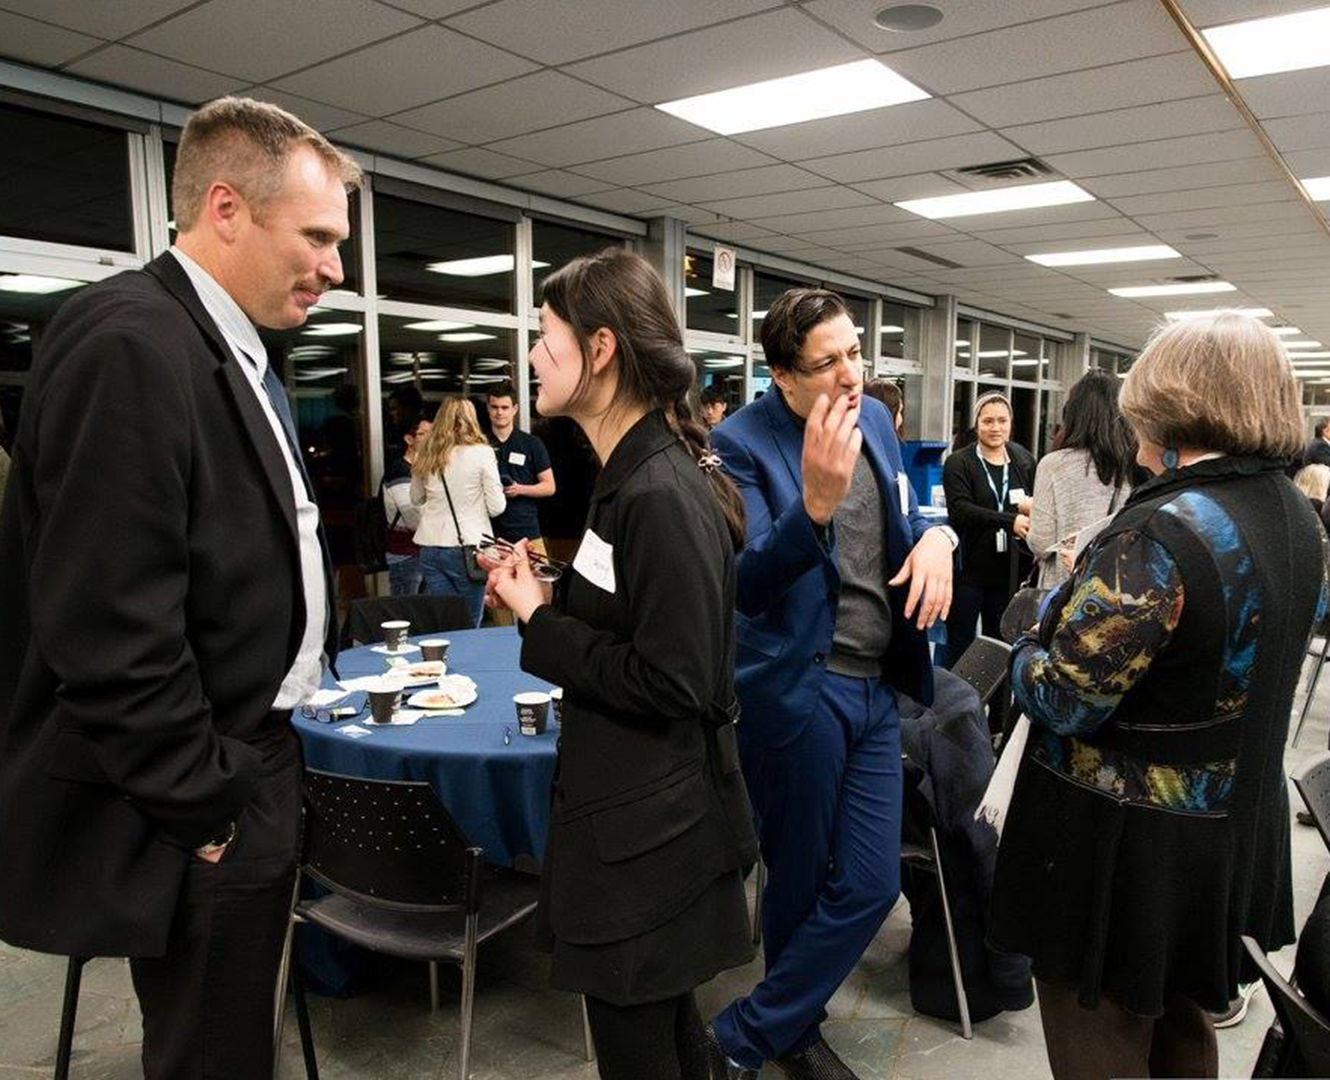 Life after NAIT gives students the opportunity to network professionals.